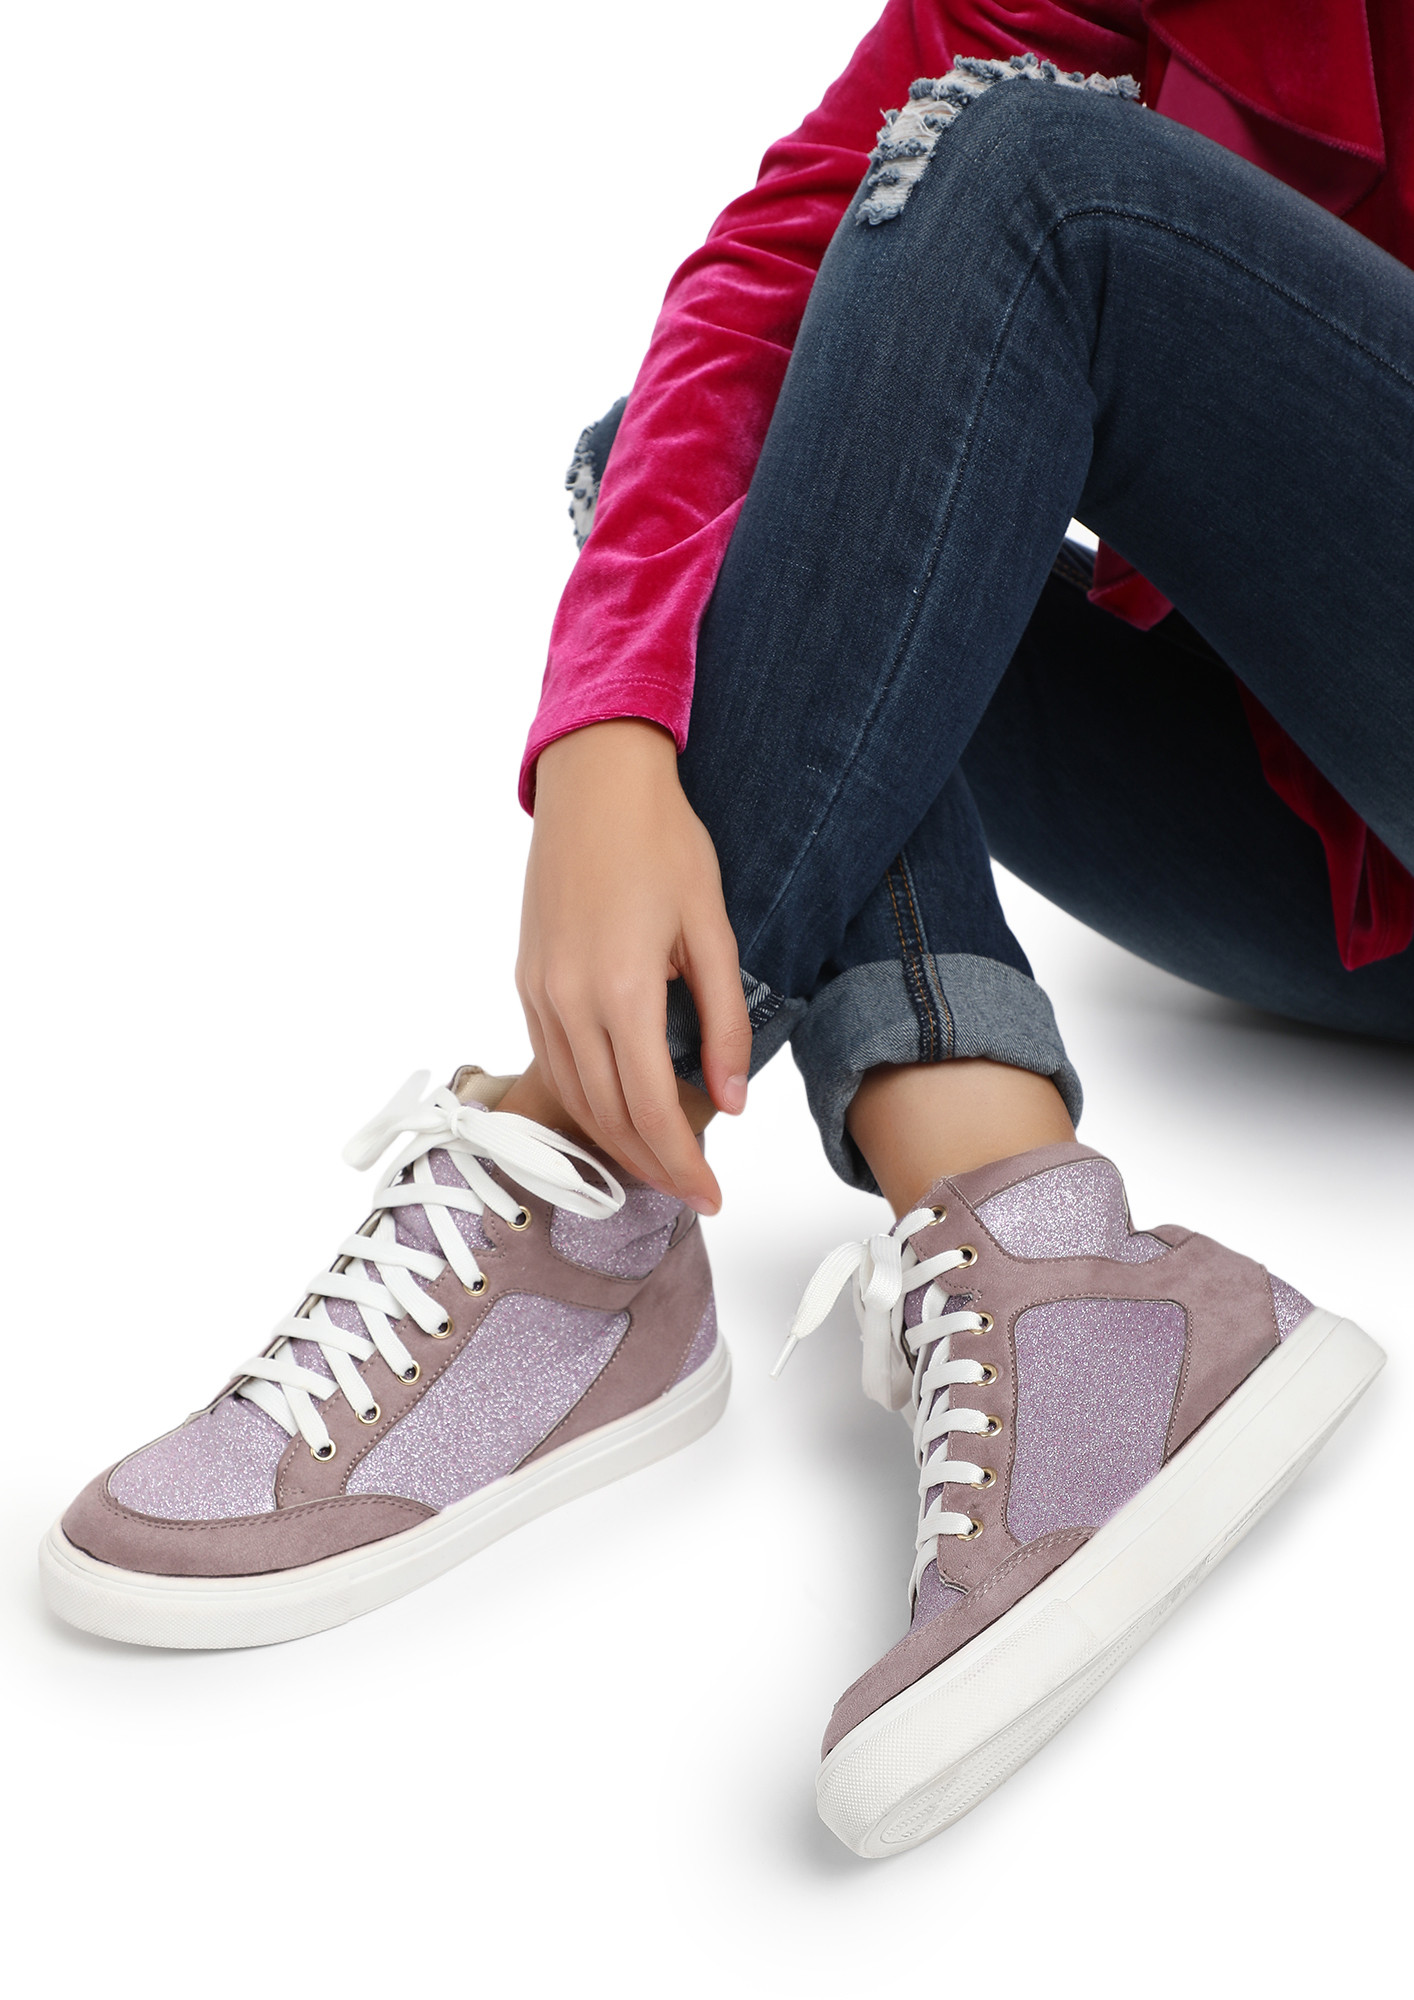 WALK AND SHIMMER PINK HIGH TOP TRAINERS